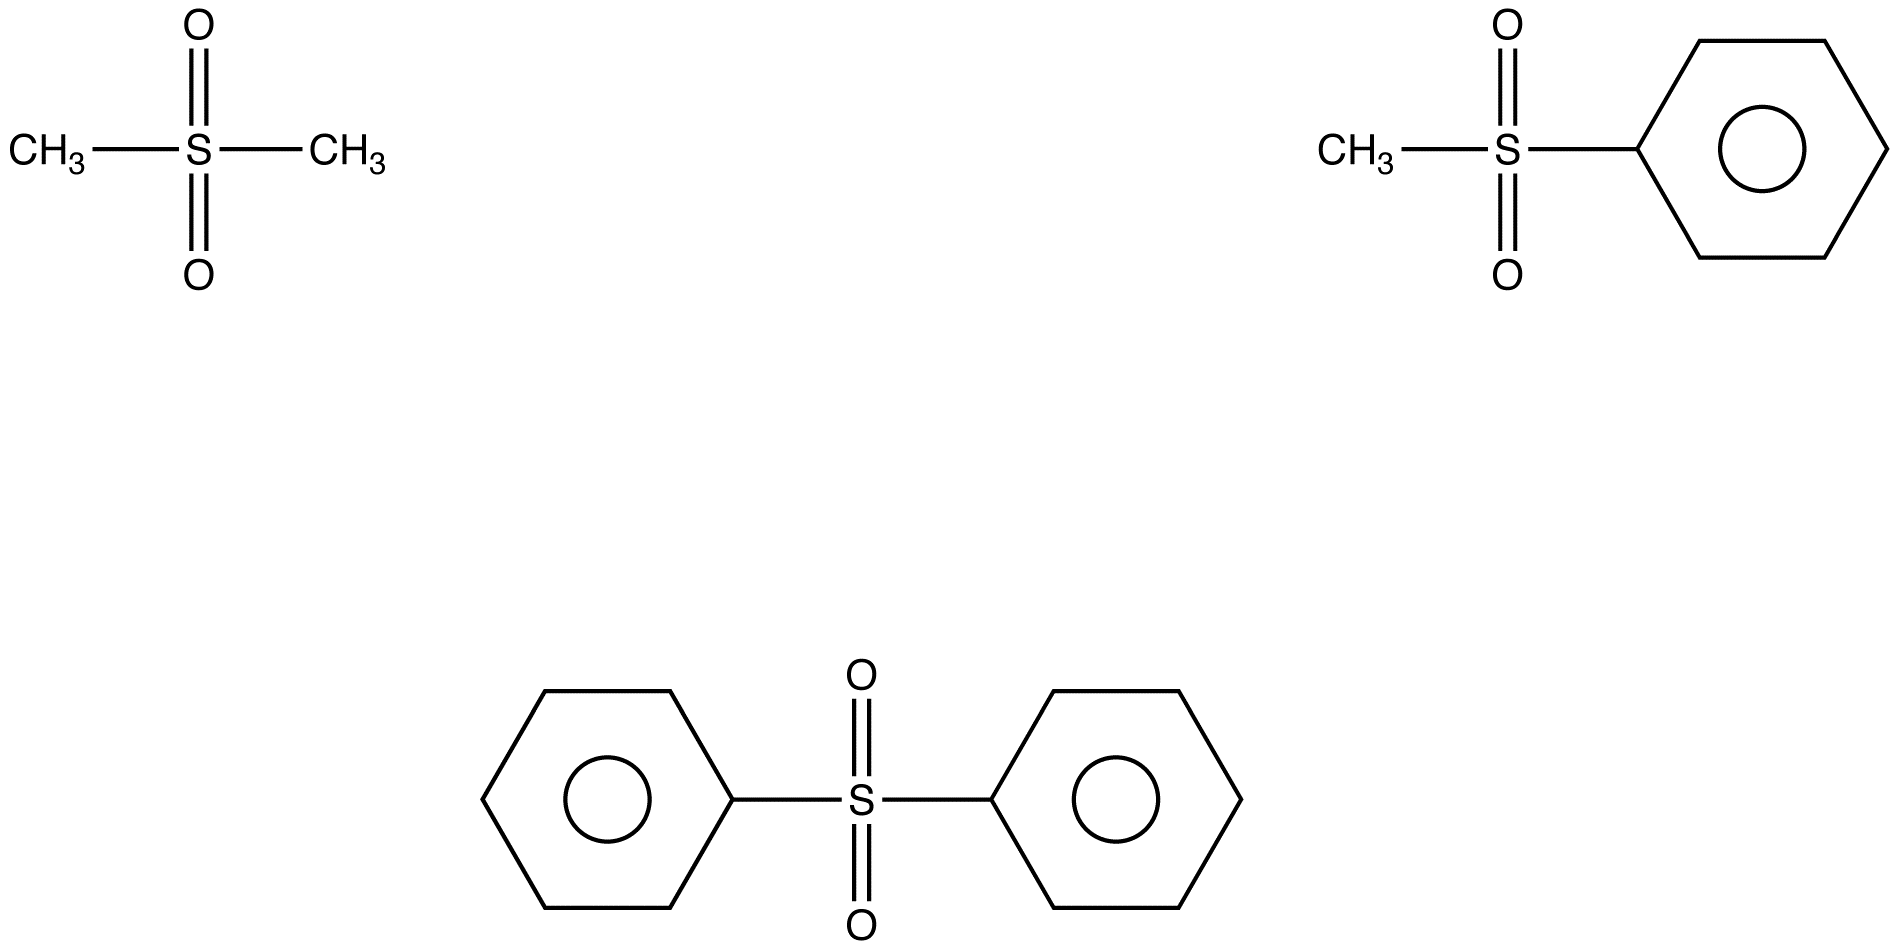 sulfone2.png